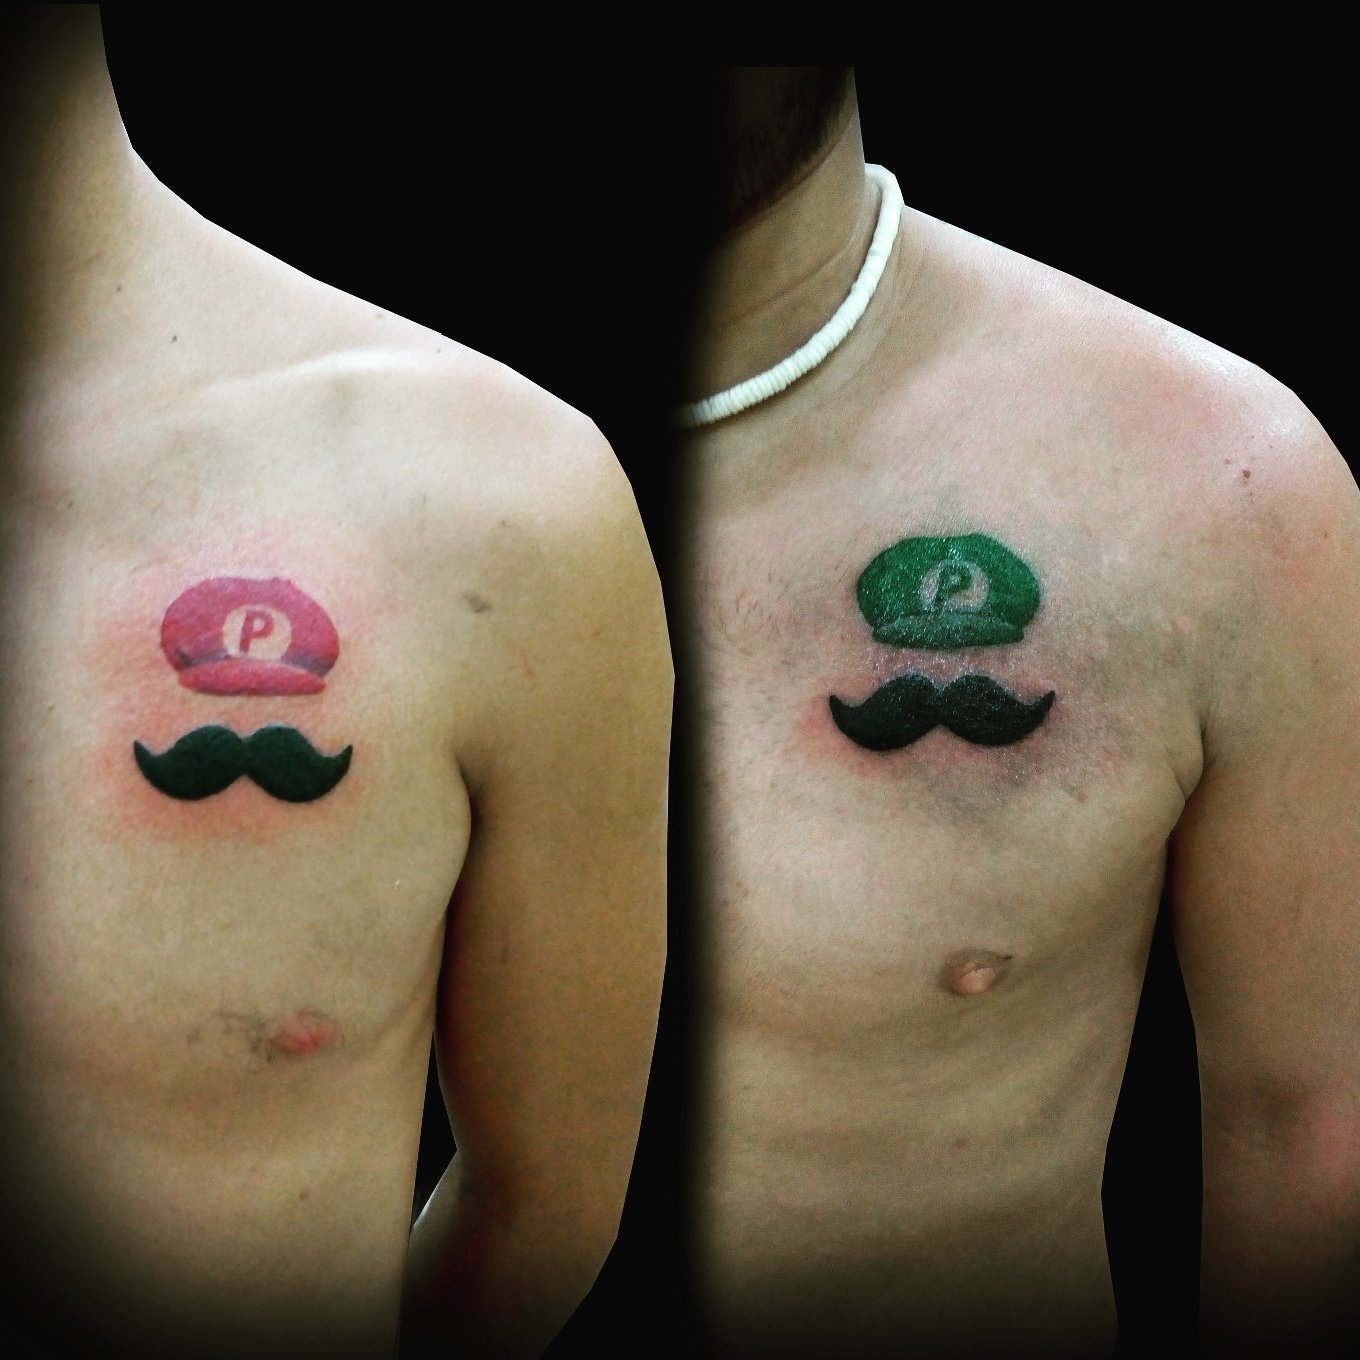 Taurus Tattoostudio  Get your Switch ready for  with Mario and Luigi  Thanks for getting these matchy tattoos with our Victoria Youre game  ready  Facebook